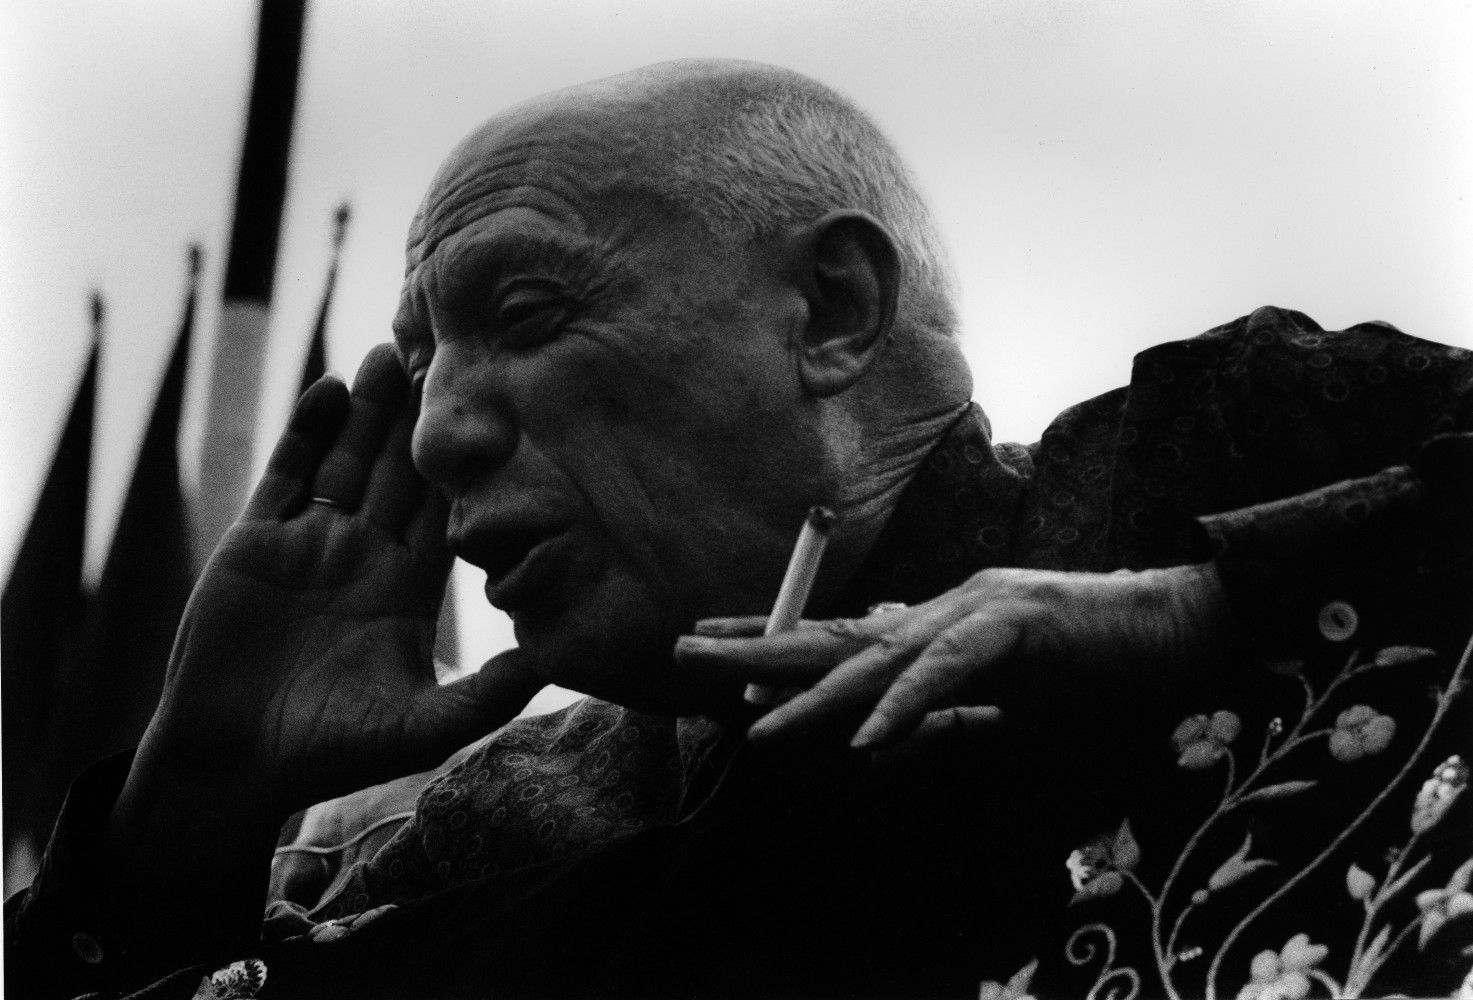 Picasso, Fr&amp;eacute;jus, 1962

silver gelatin print, edition 2/30

11.81 x 15.75 inches; 30 x 40 centimeters

LSFA# 11176